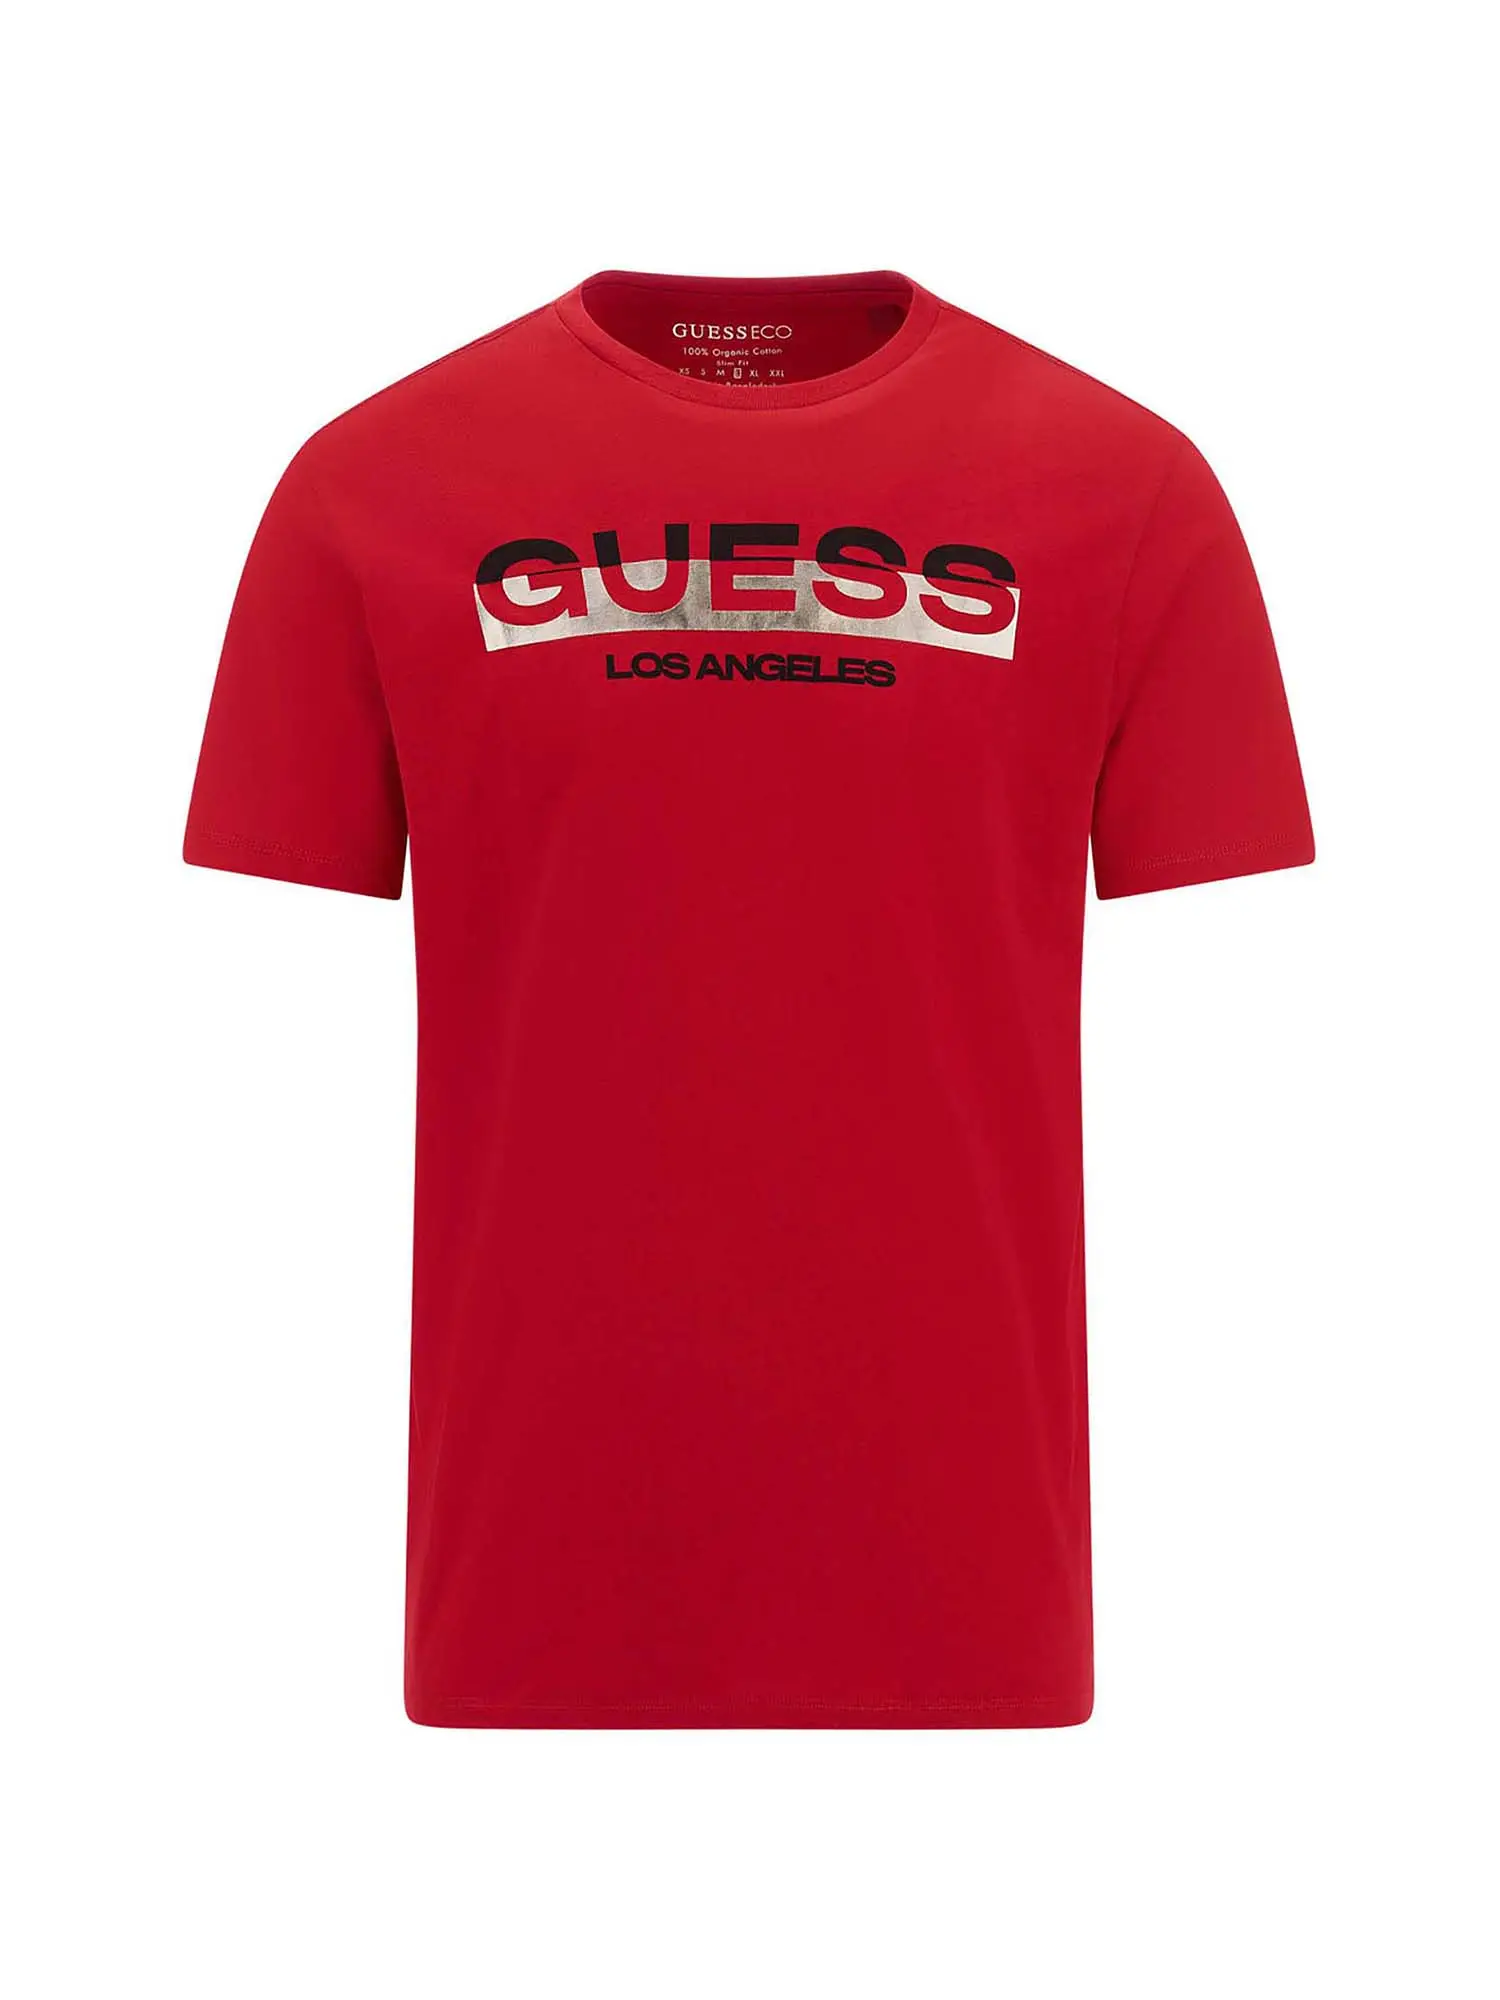 T-SHIRT UOMO - GUESS JEANS - M4RI60 K9RM1 - ROSSO, XS